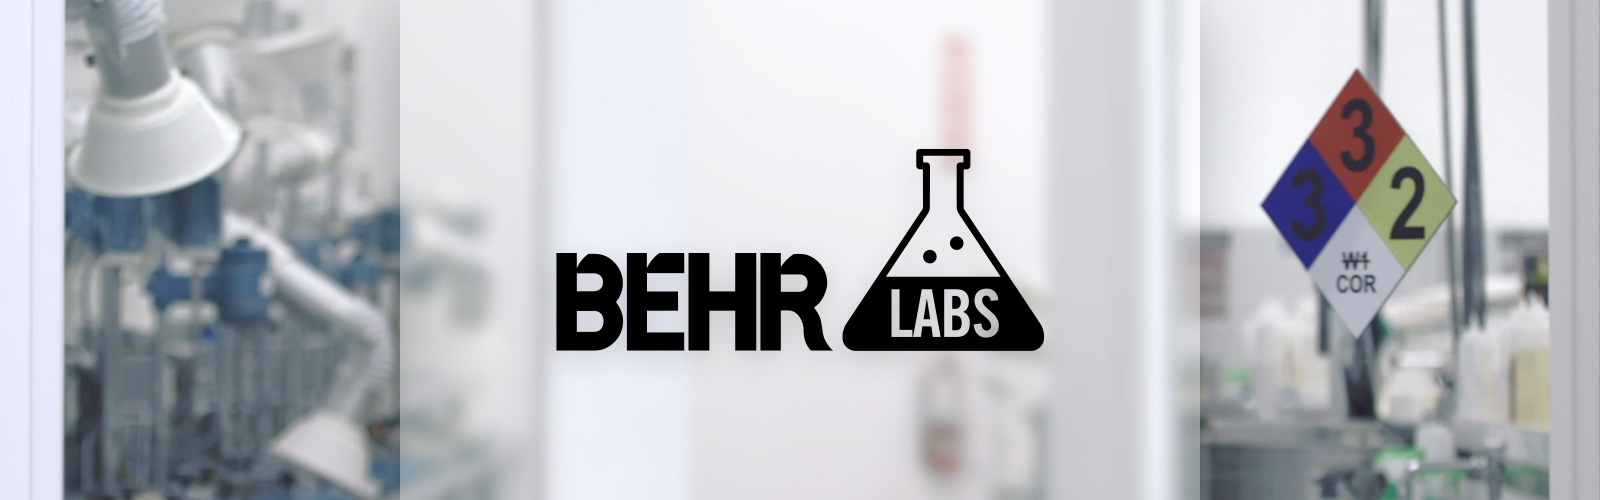 Desktop view of an image of a laboratory with a title BEHR LABS